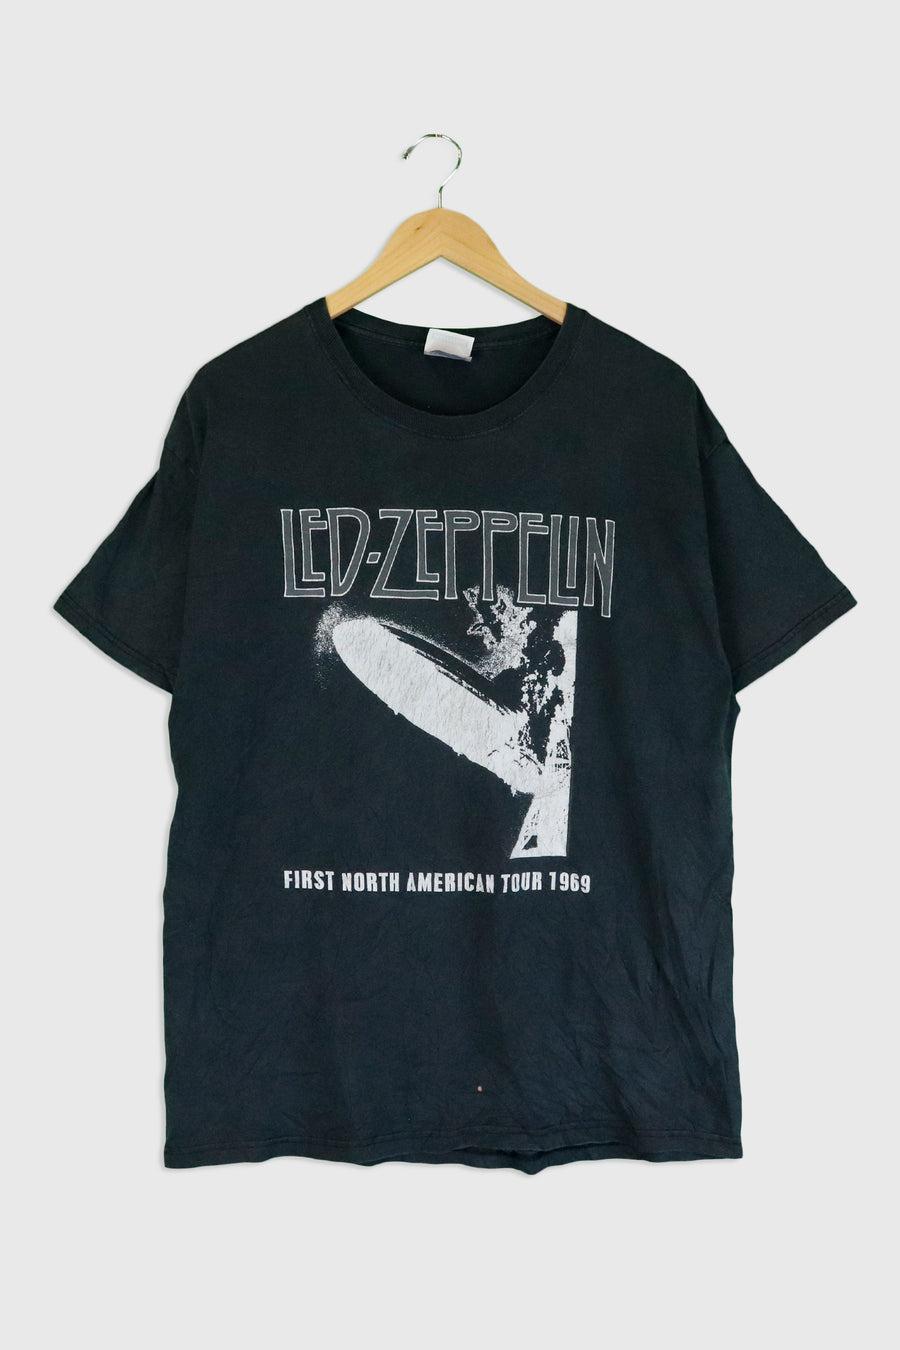 Vintage 1969 Led Zeplin 'First North American Tour' T Shirt